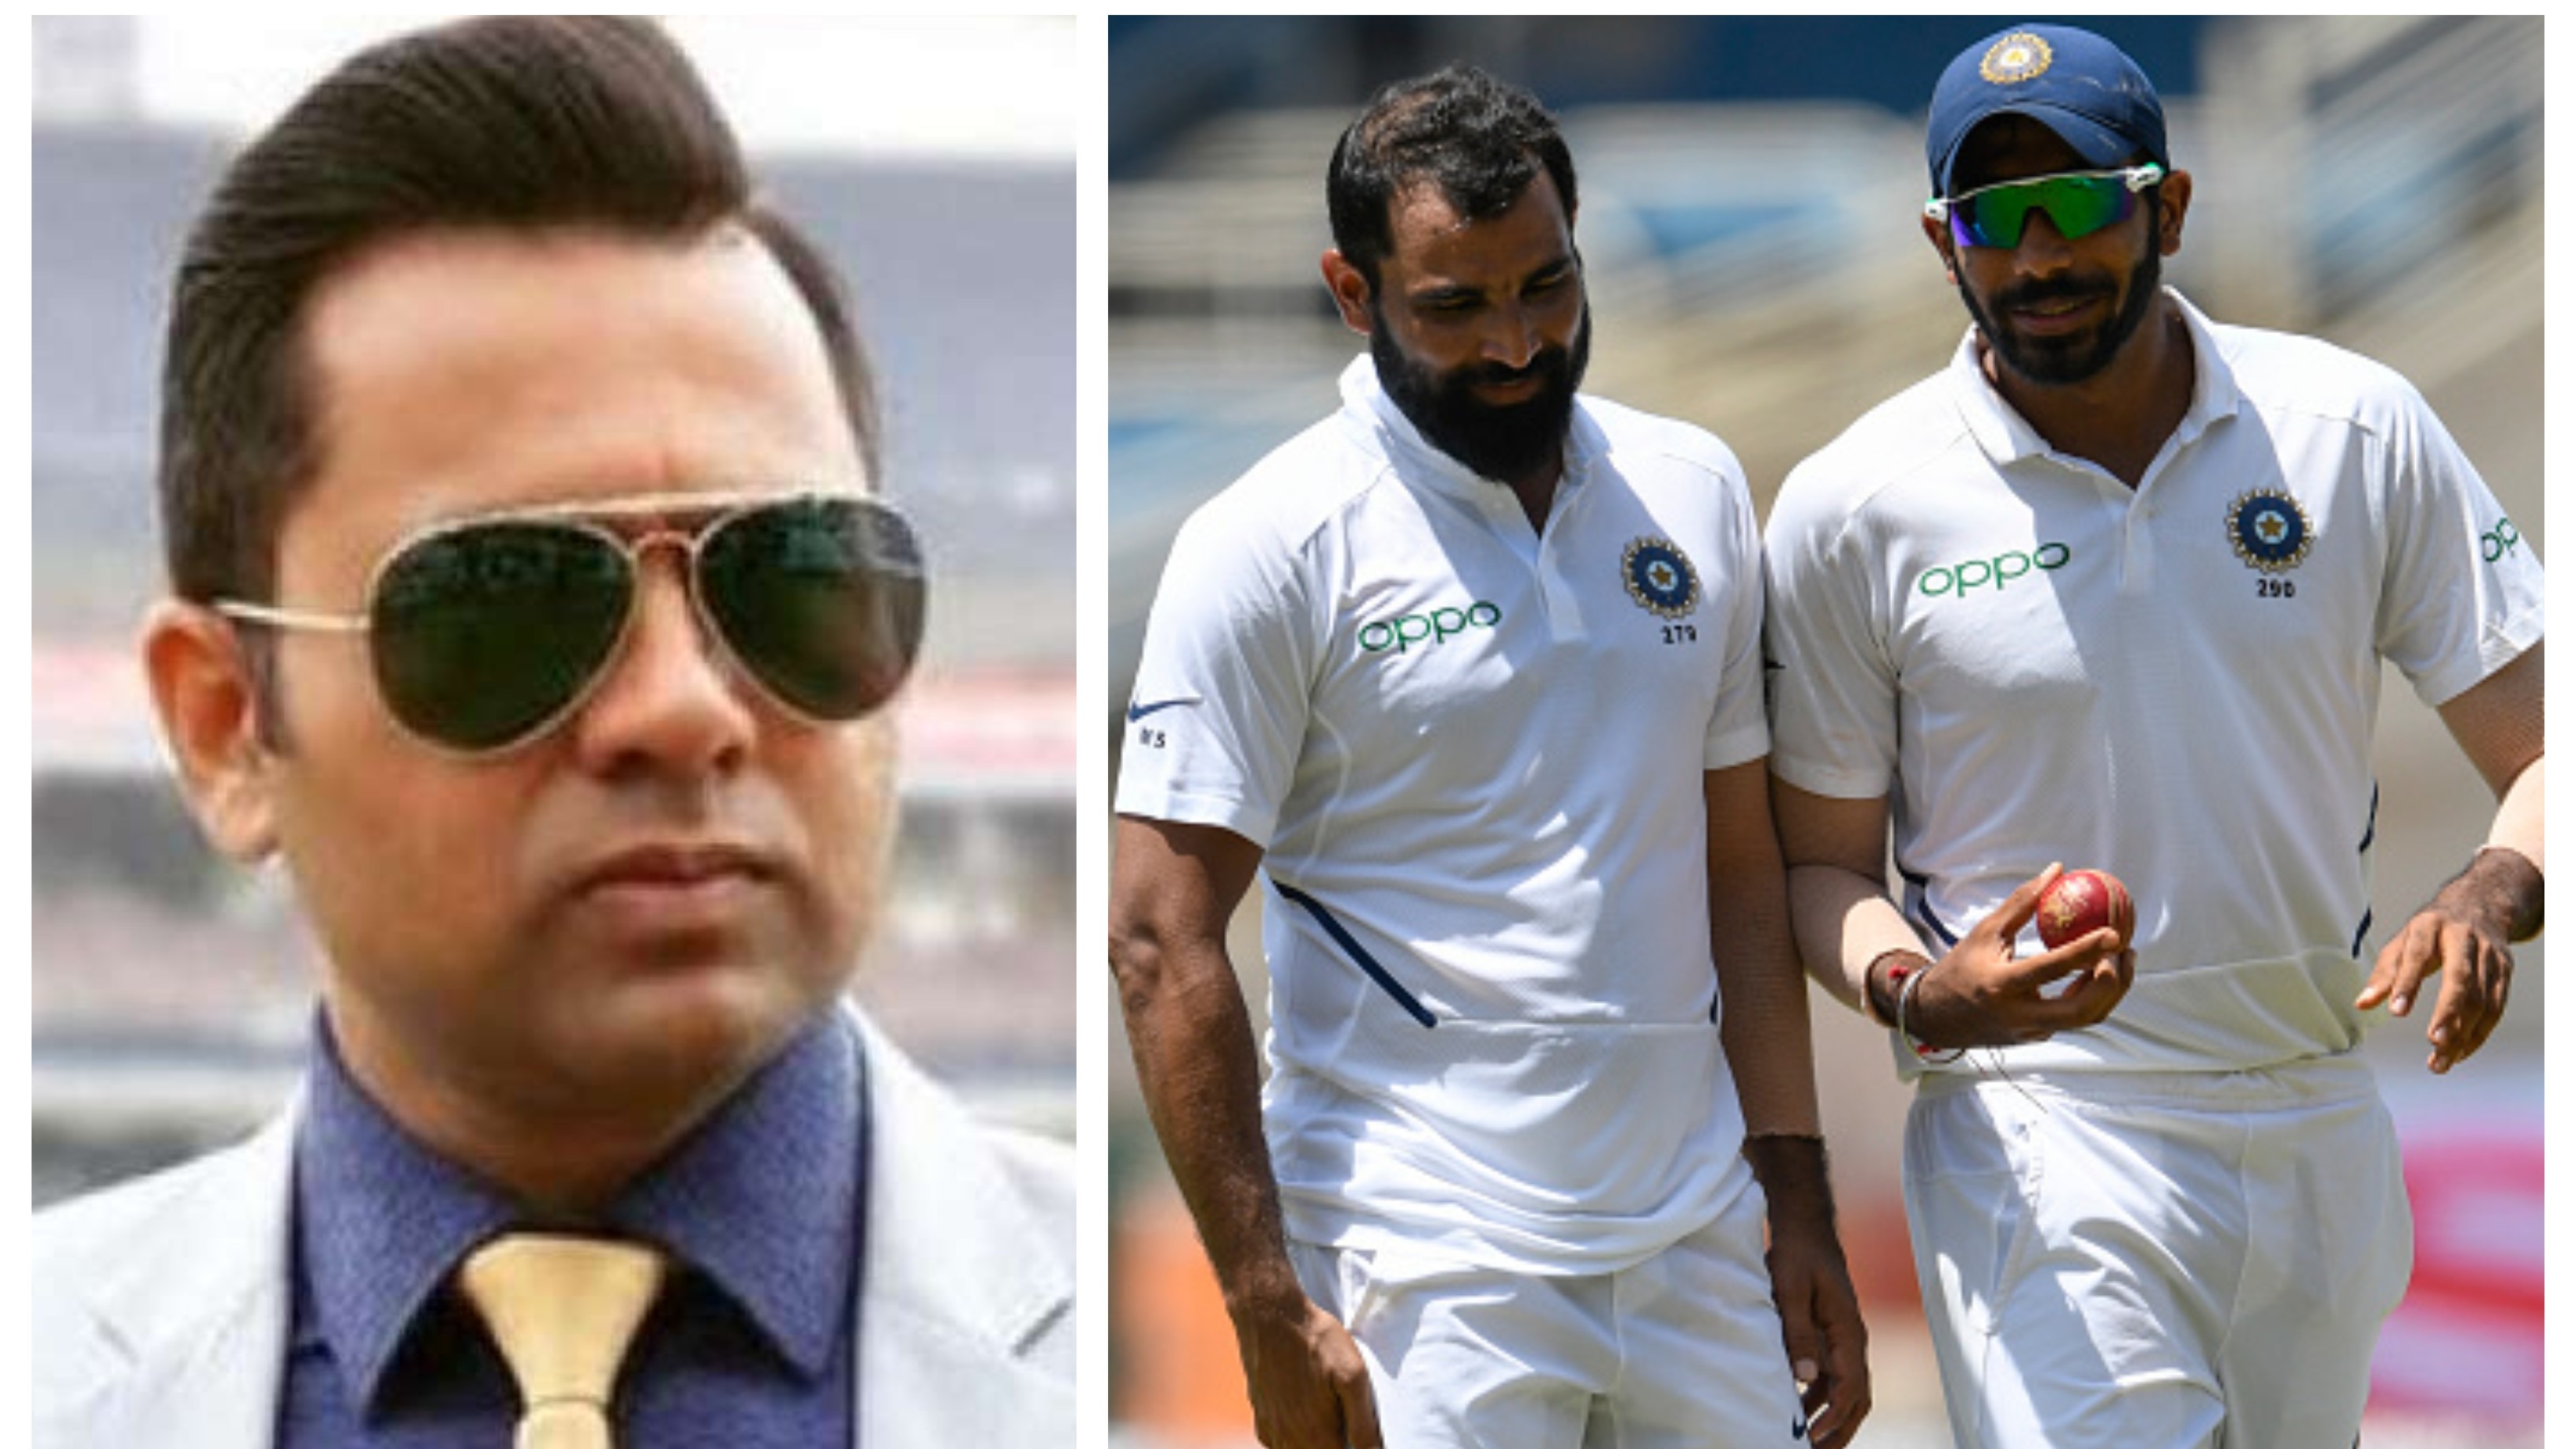 AUS v IND 2020-21: Aakash Chopra feels Bumrah, Shami can rock Australia’s top order in the Test series